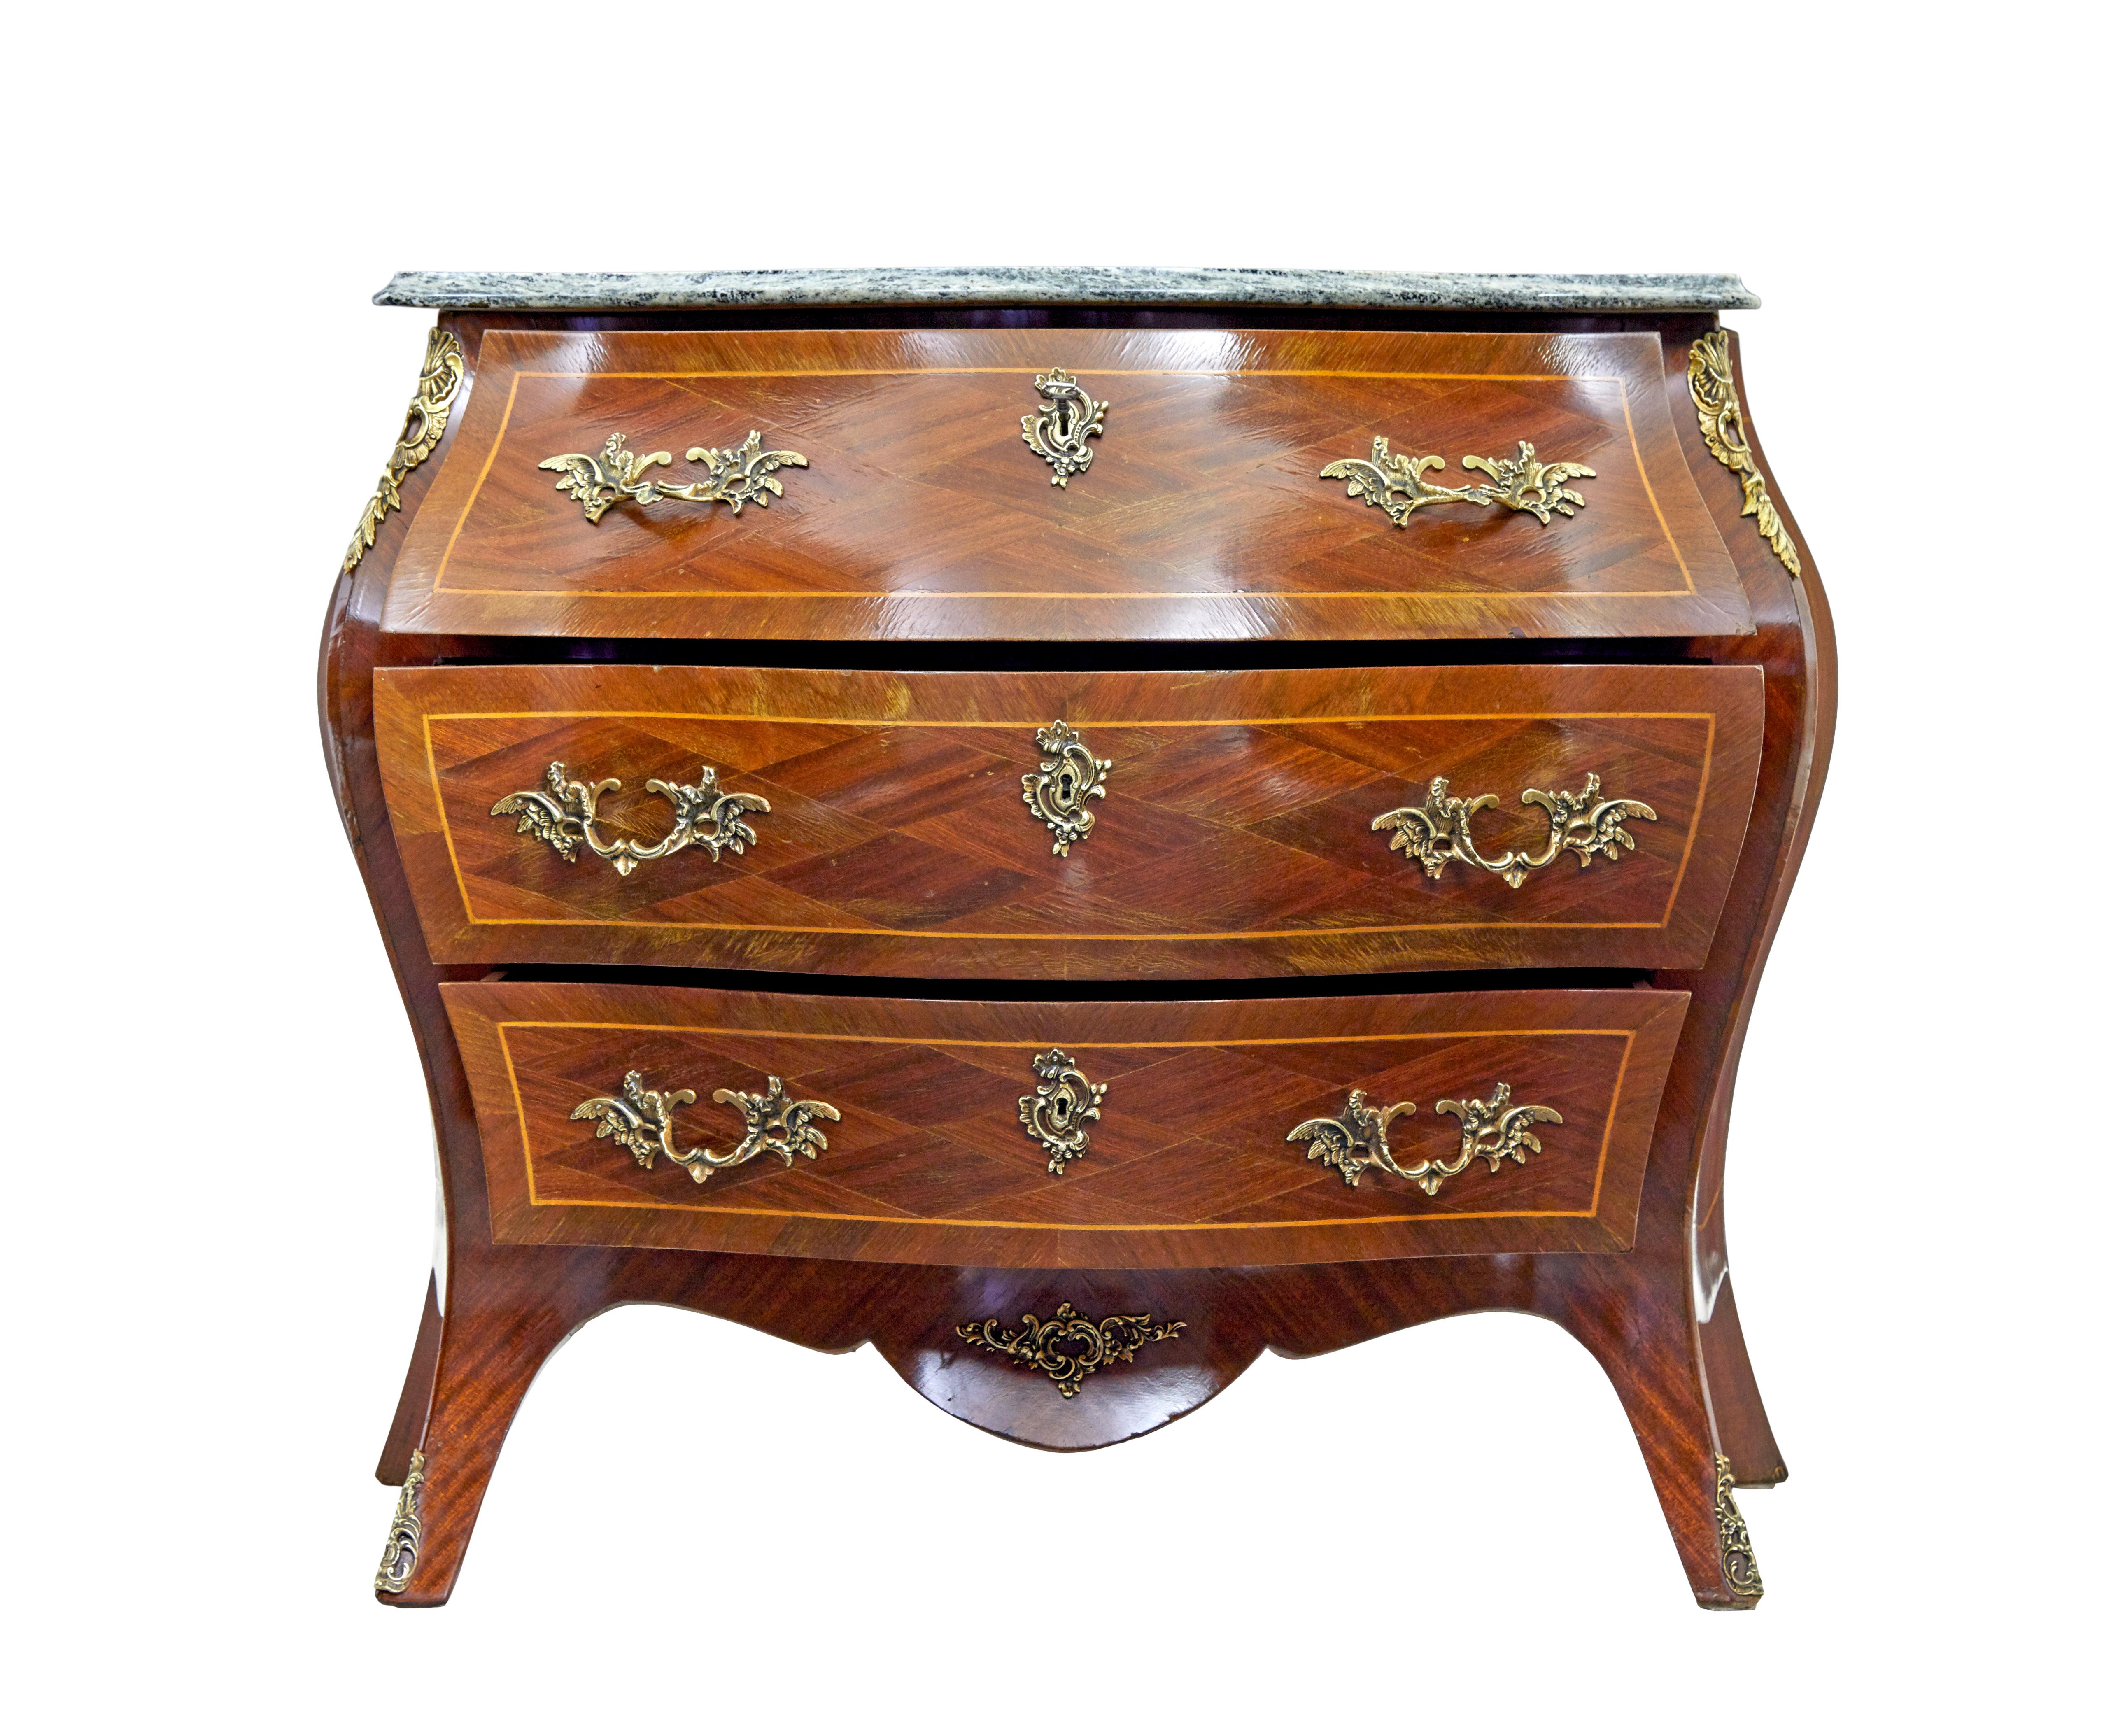 Mid 20th century rococo revival commode circa 1950.

Bombe shaped 3 drawer commode made in mahogany and kingwood, with shaped marble top. Green and grey marble is loose fitting for easier movement and shipping.

Arranged mahogany veneers with